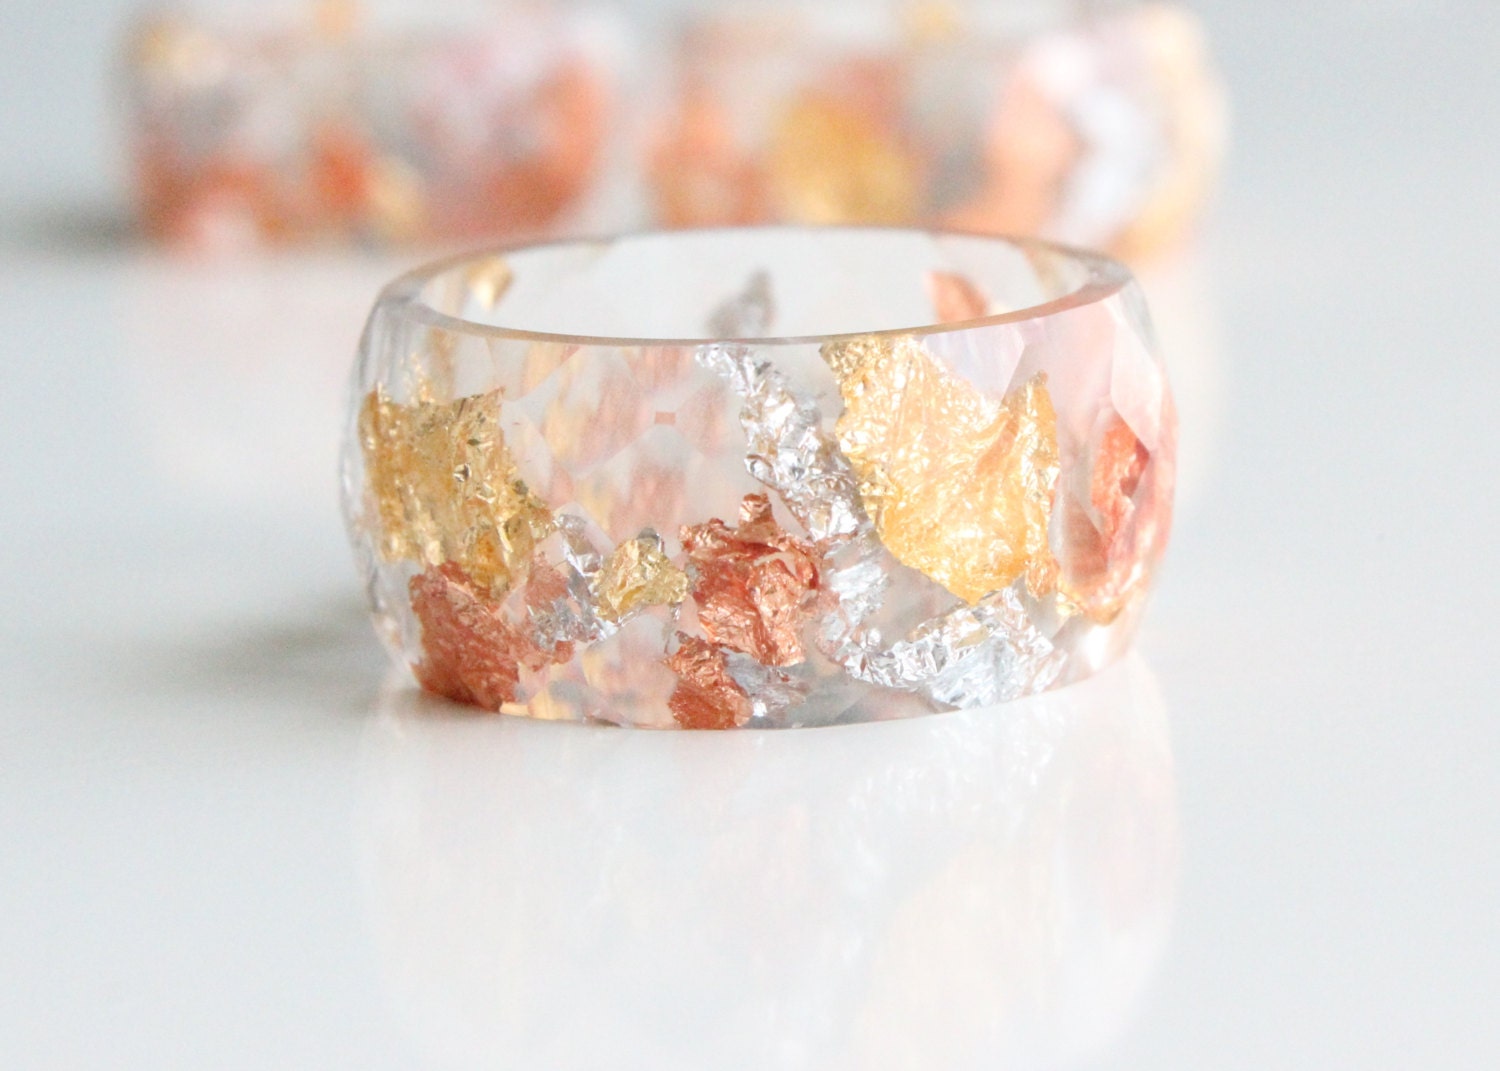 Clear Resin Ring Featuring Gold Accents. - One Size Fits M (87185)